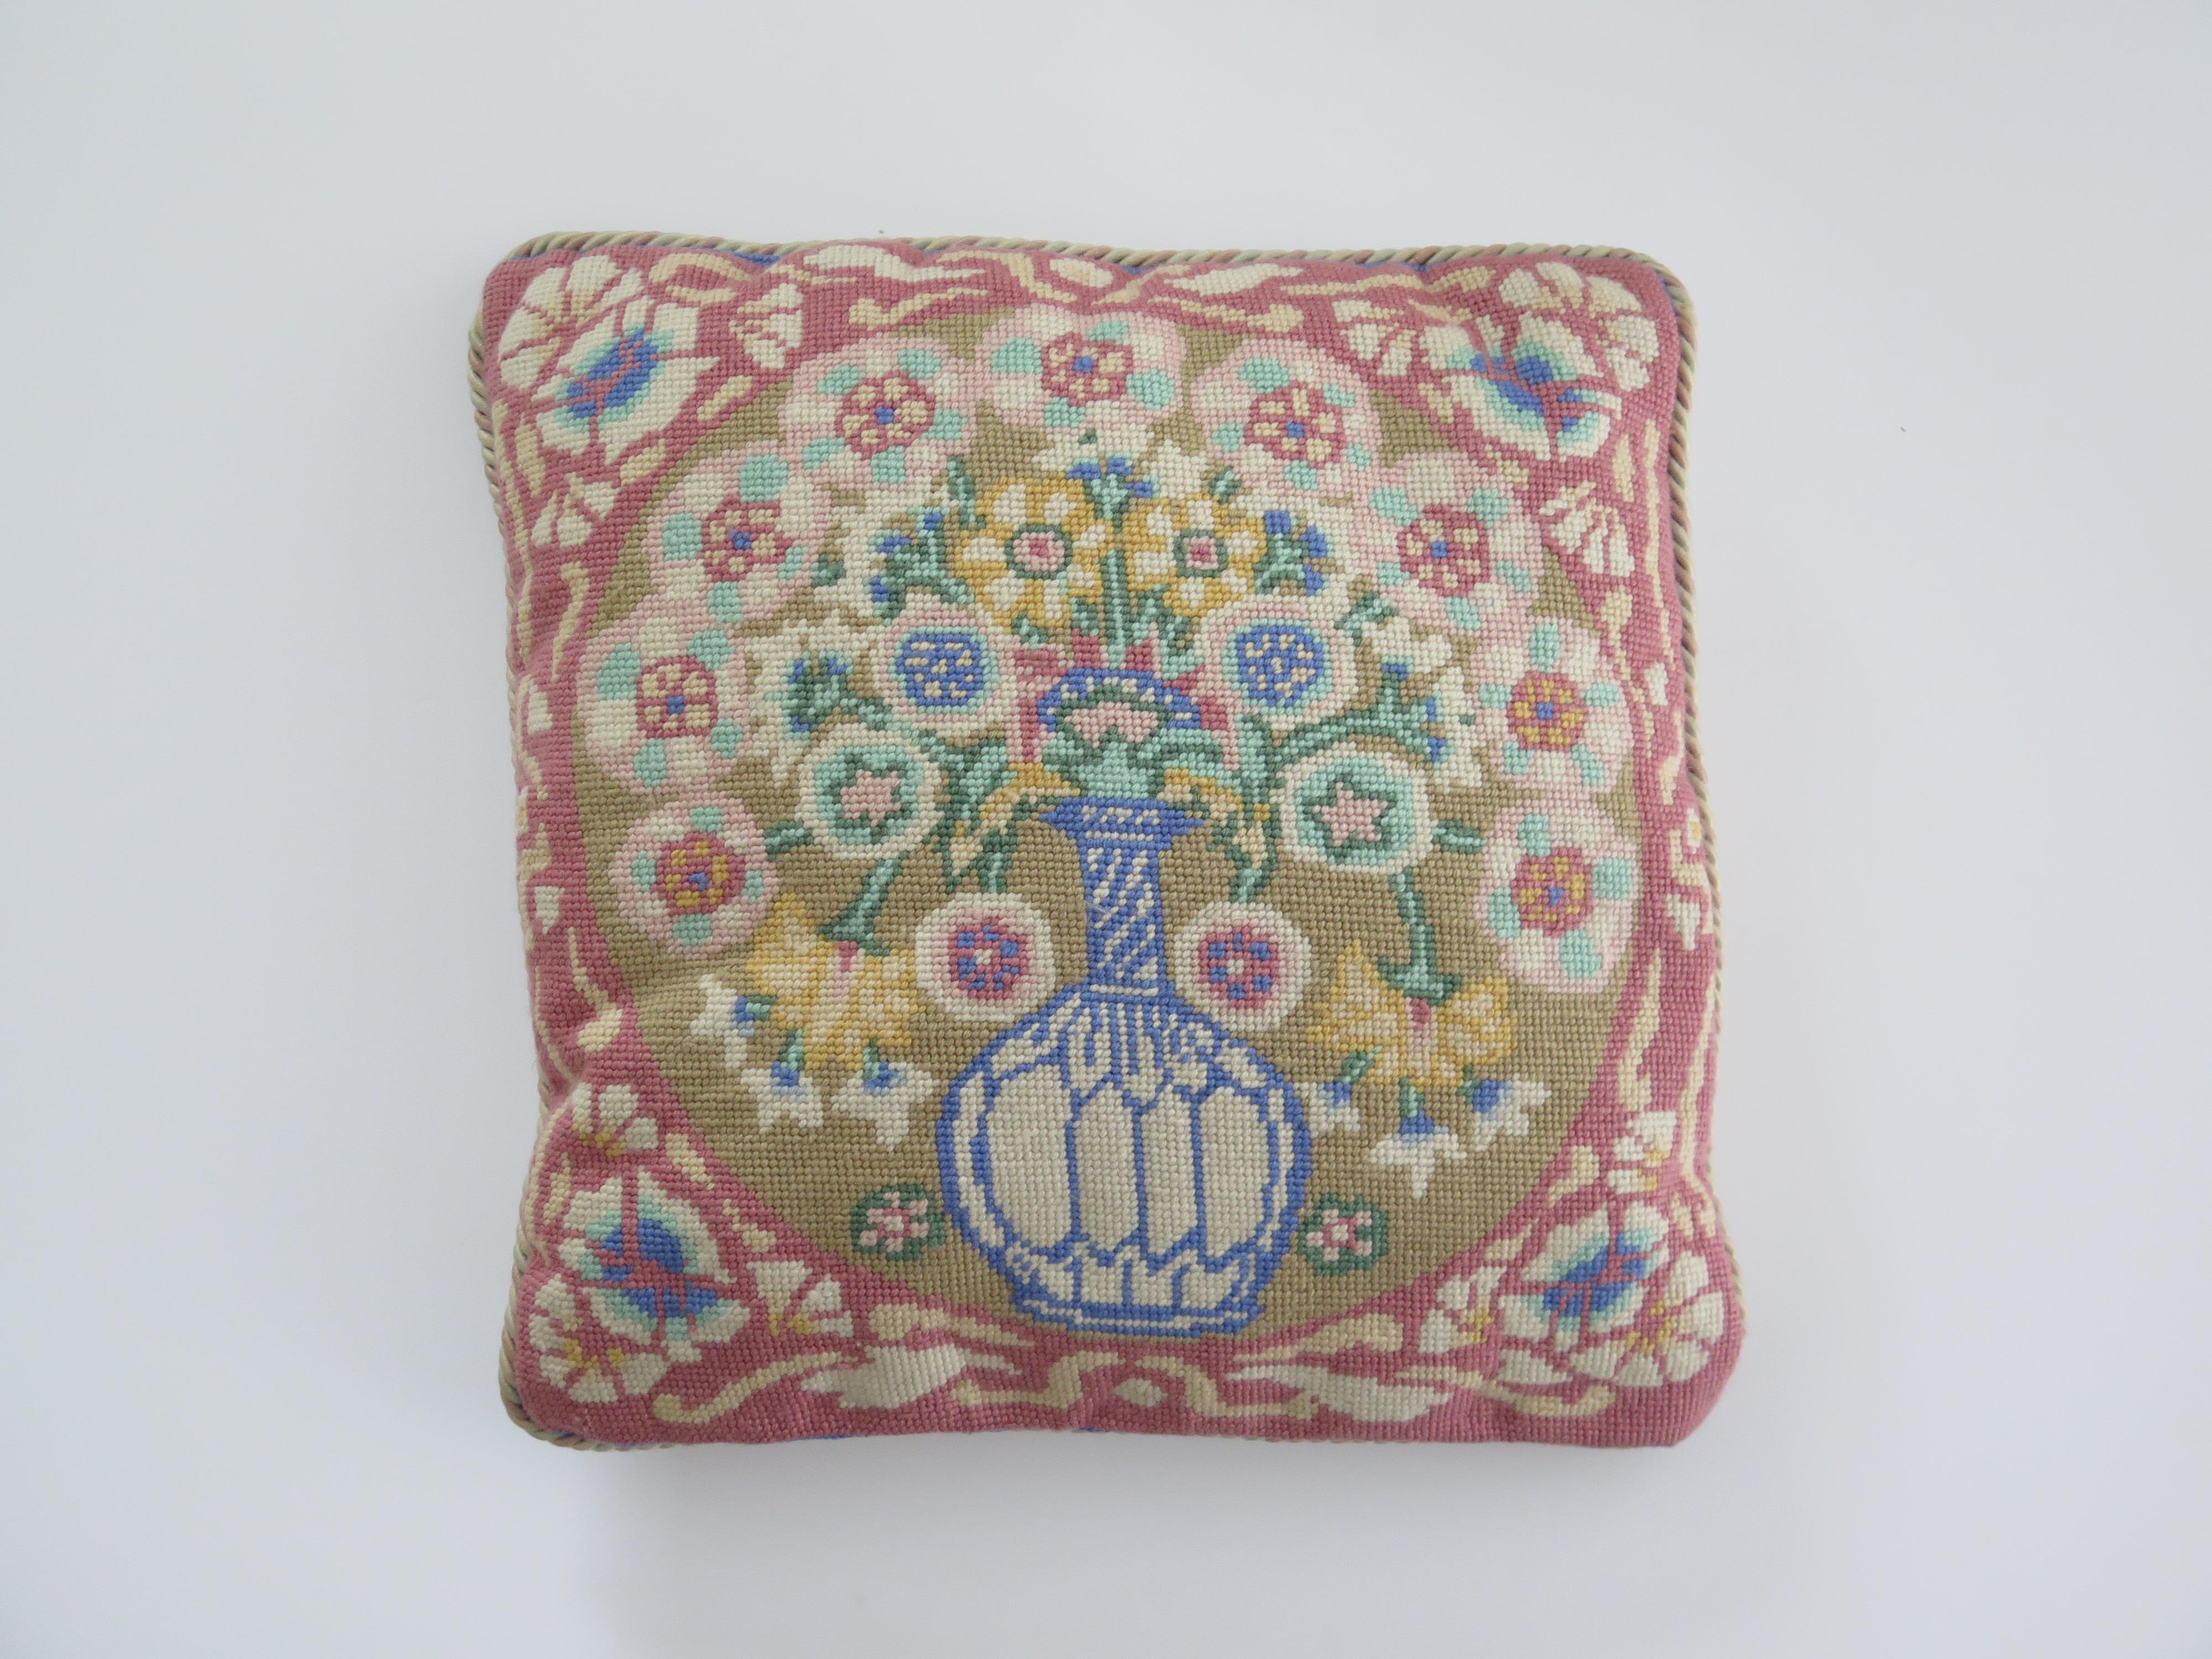 This is a very attractive woven pillow or cushion with a country floral style, which we date to circa 1930s of the 20th century.

The floral themed design depicts a blue vase holding different coloured flowers, all in soft pastel shades, with colors